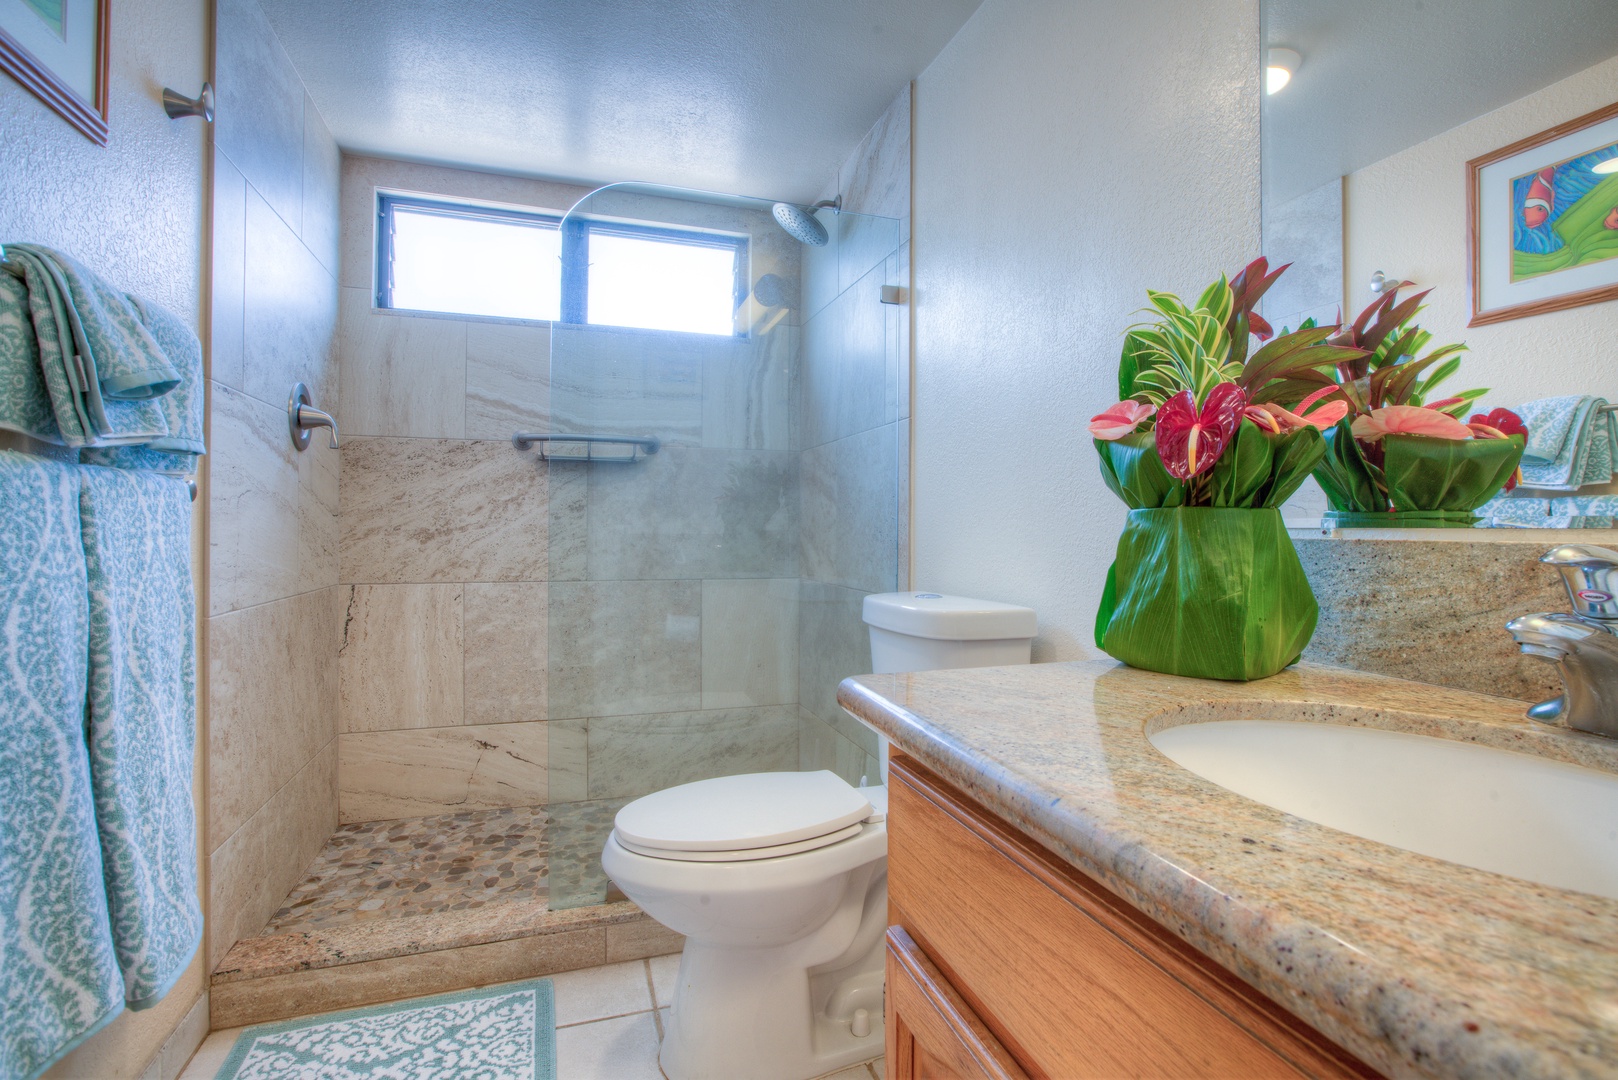 Kailua Kona Vacation Rentals, Kona Reef F11 - Bath has Granite Counter and a Glass Step-in Shower with River-Rock base.